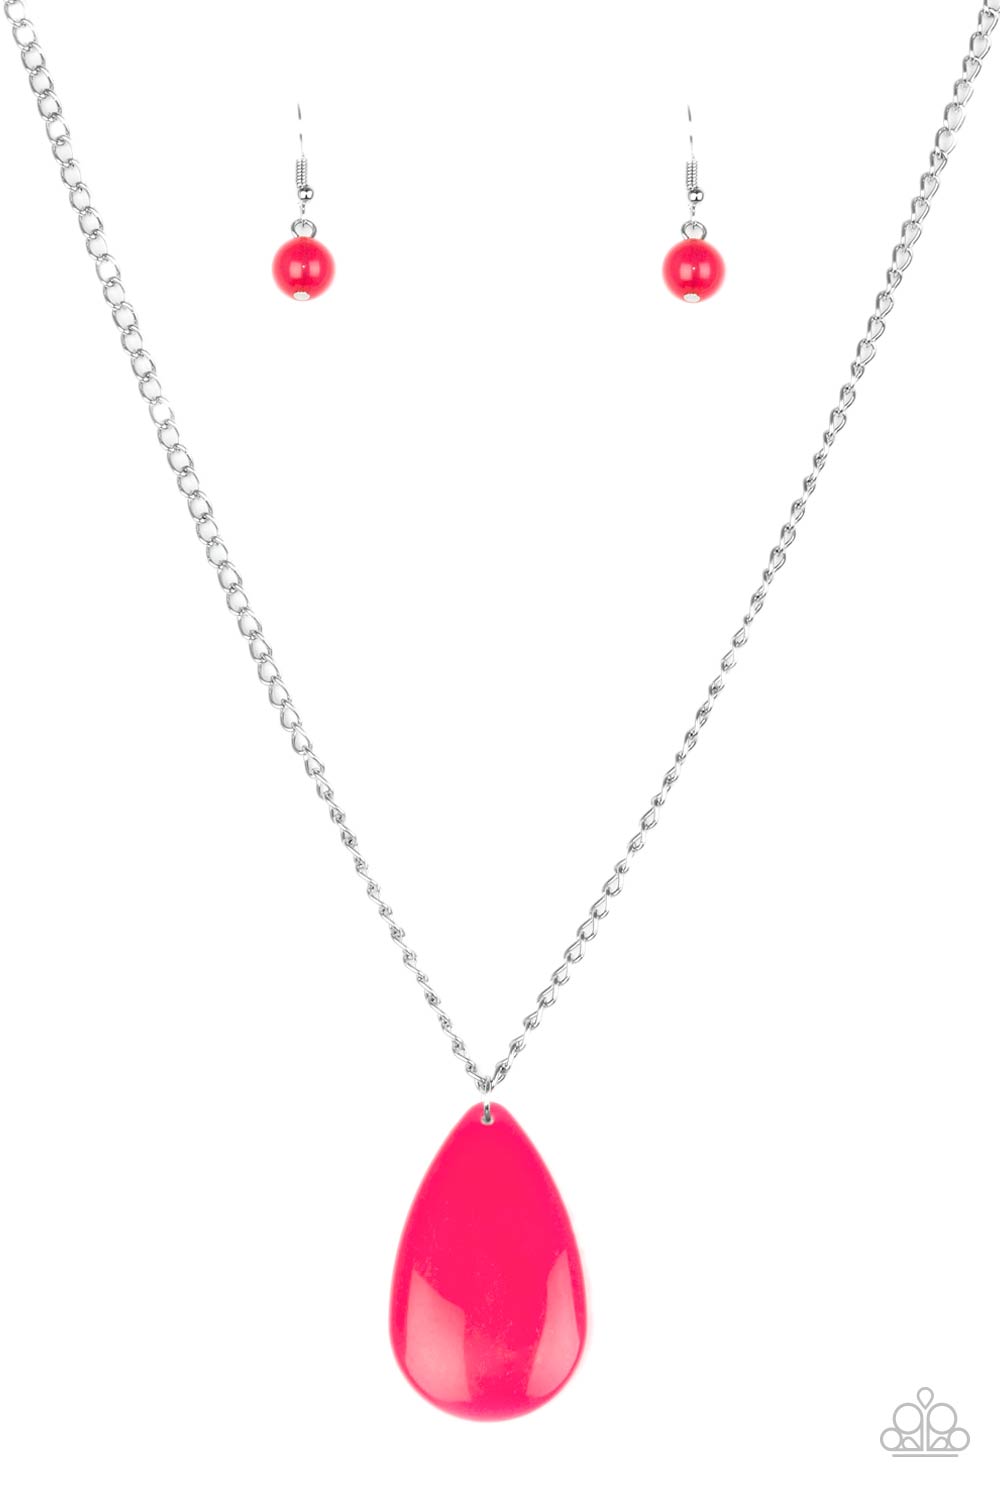 Paparazzi So Pop-YOU-lar - Pink Teardrop Necklace - A Finishing Touch Jewelry